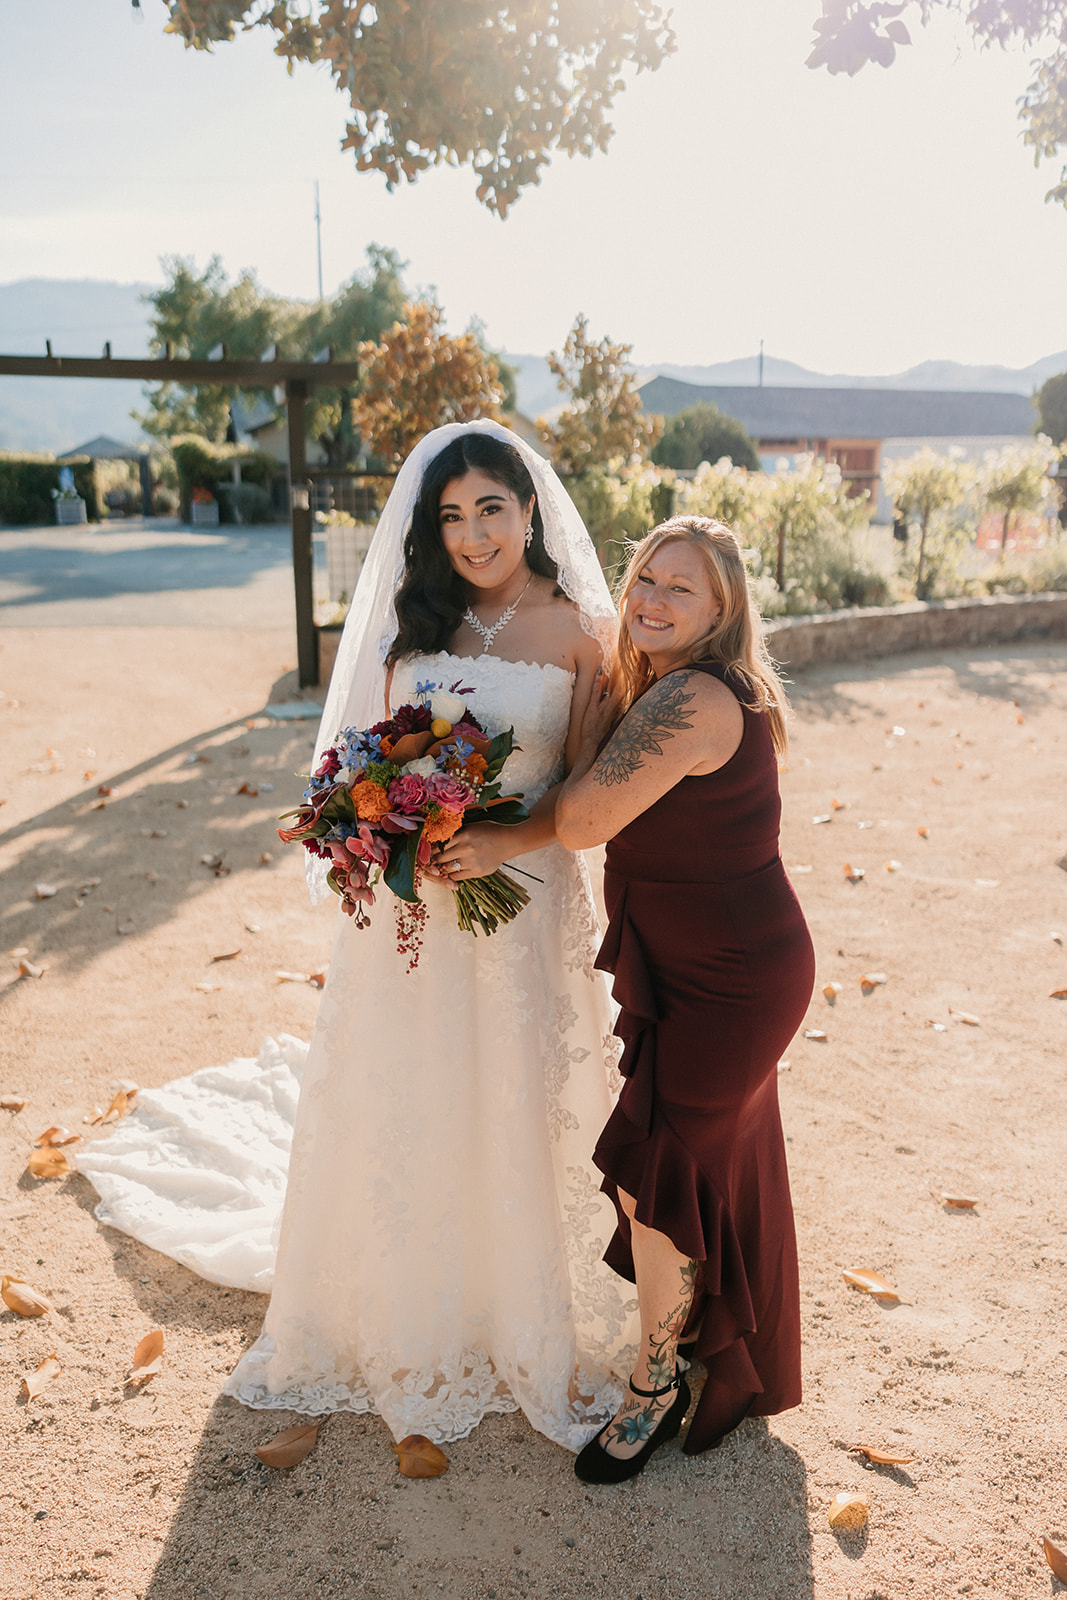 A bride in a white gown and veil holding a bouquet stands smiling with an older woman in a burgundy dress.